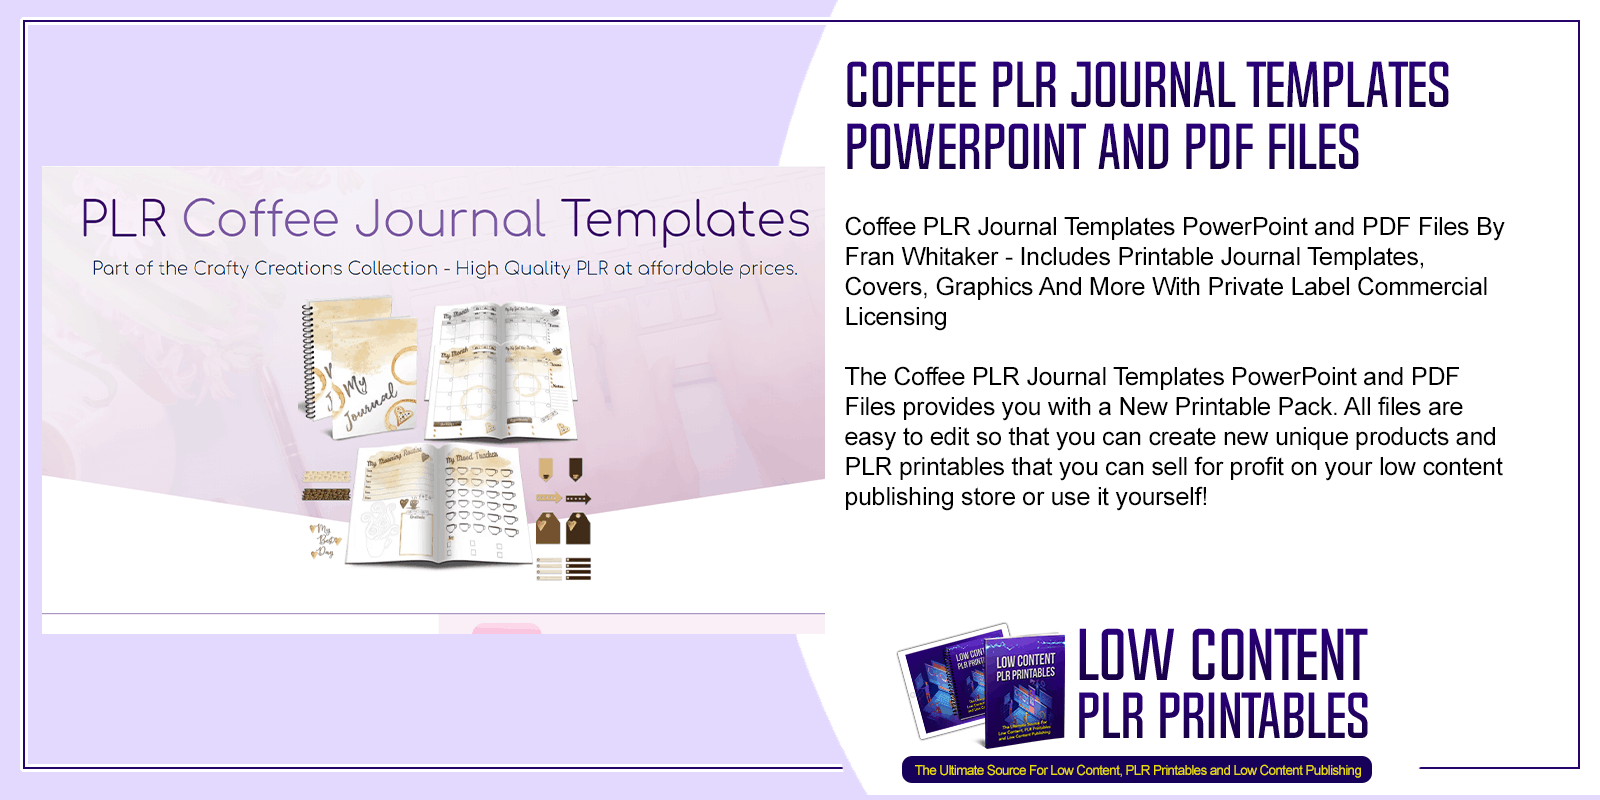 Coffee PLR Journal Templates PowerPoint and PDF Files